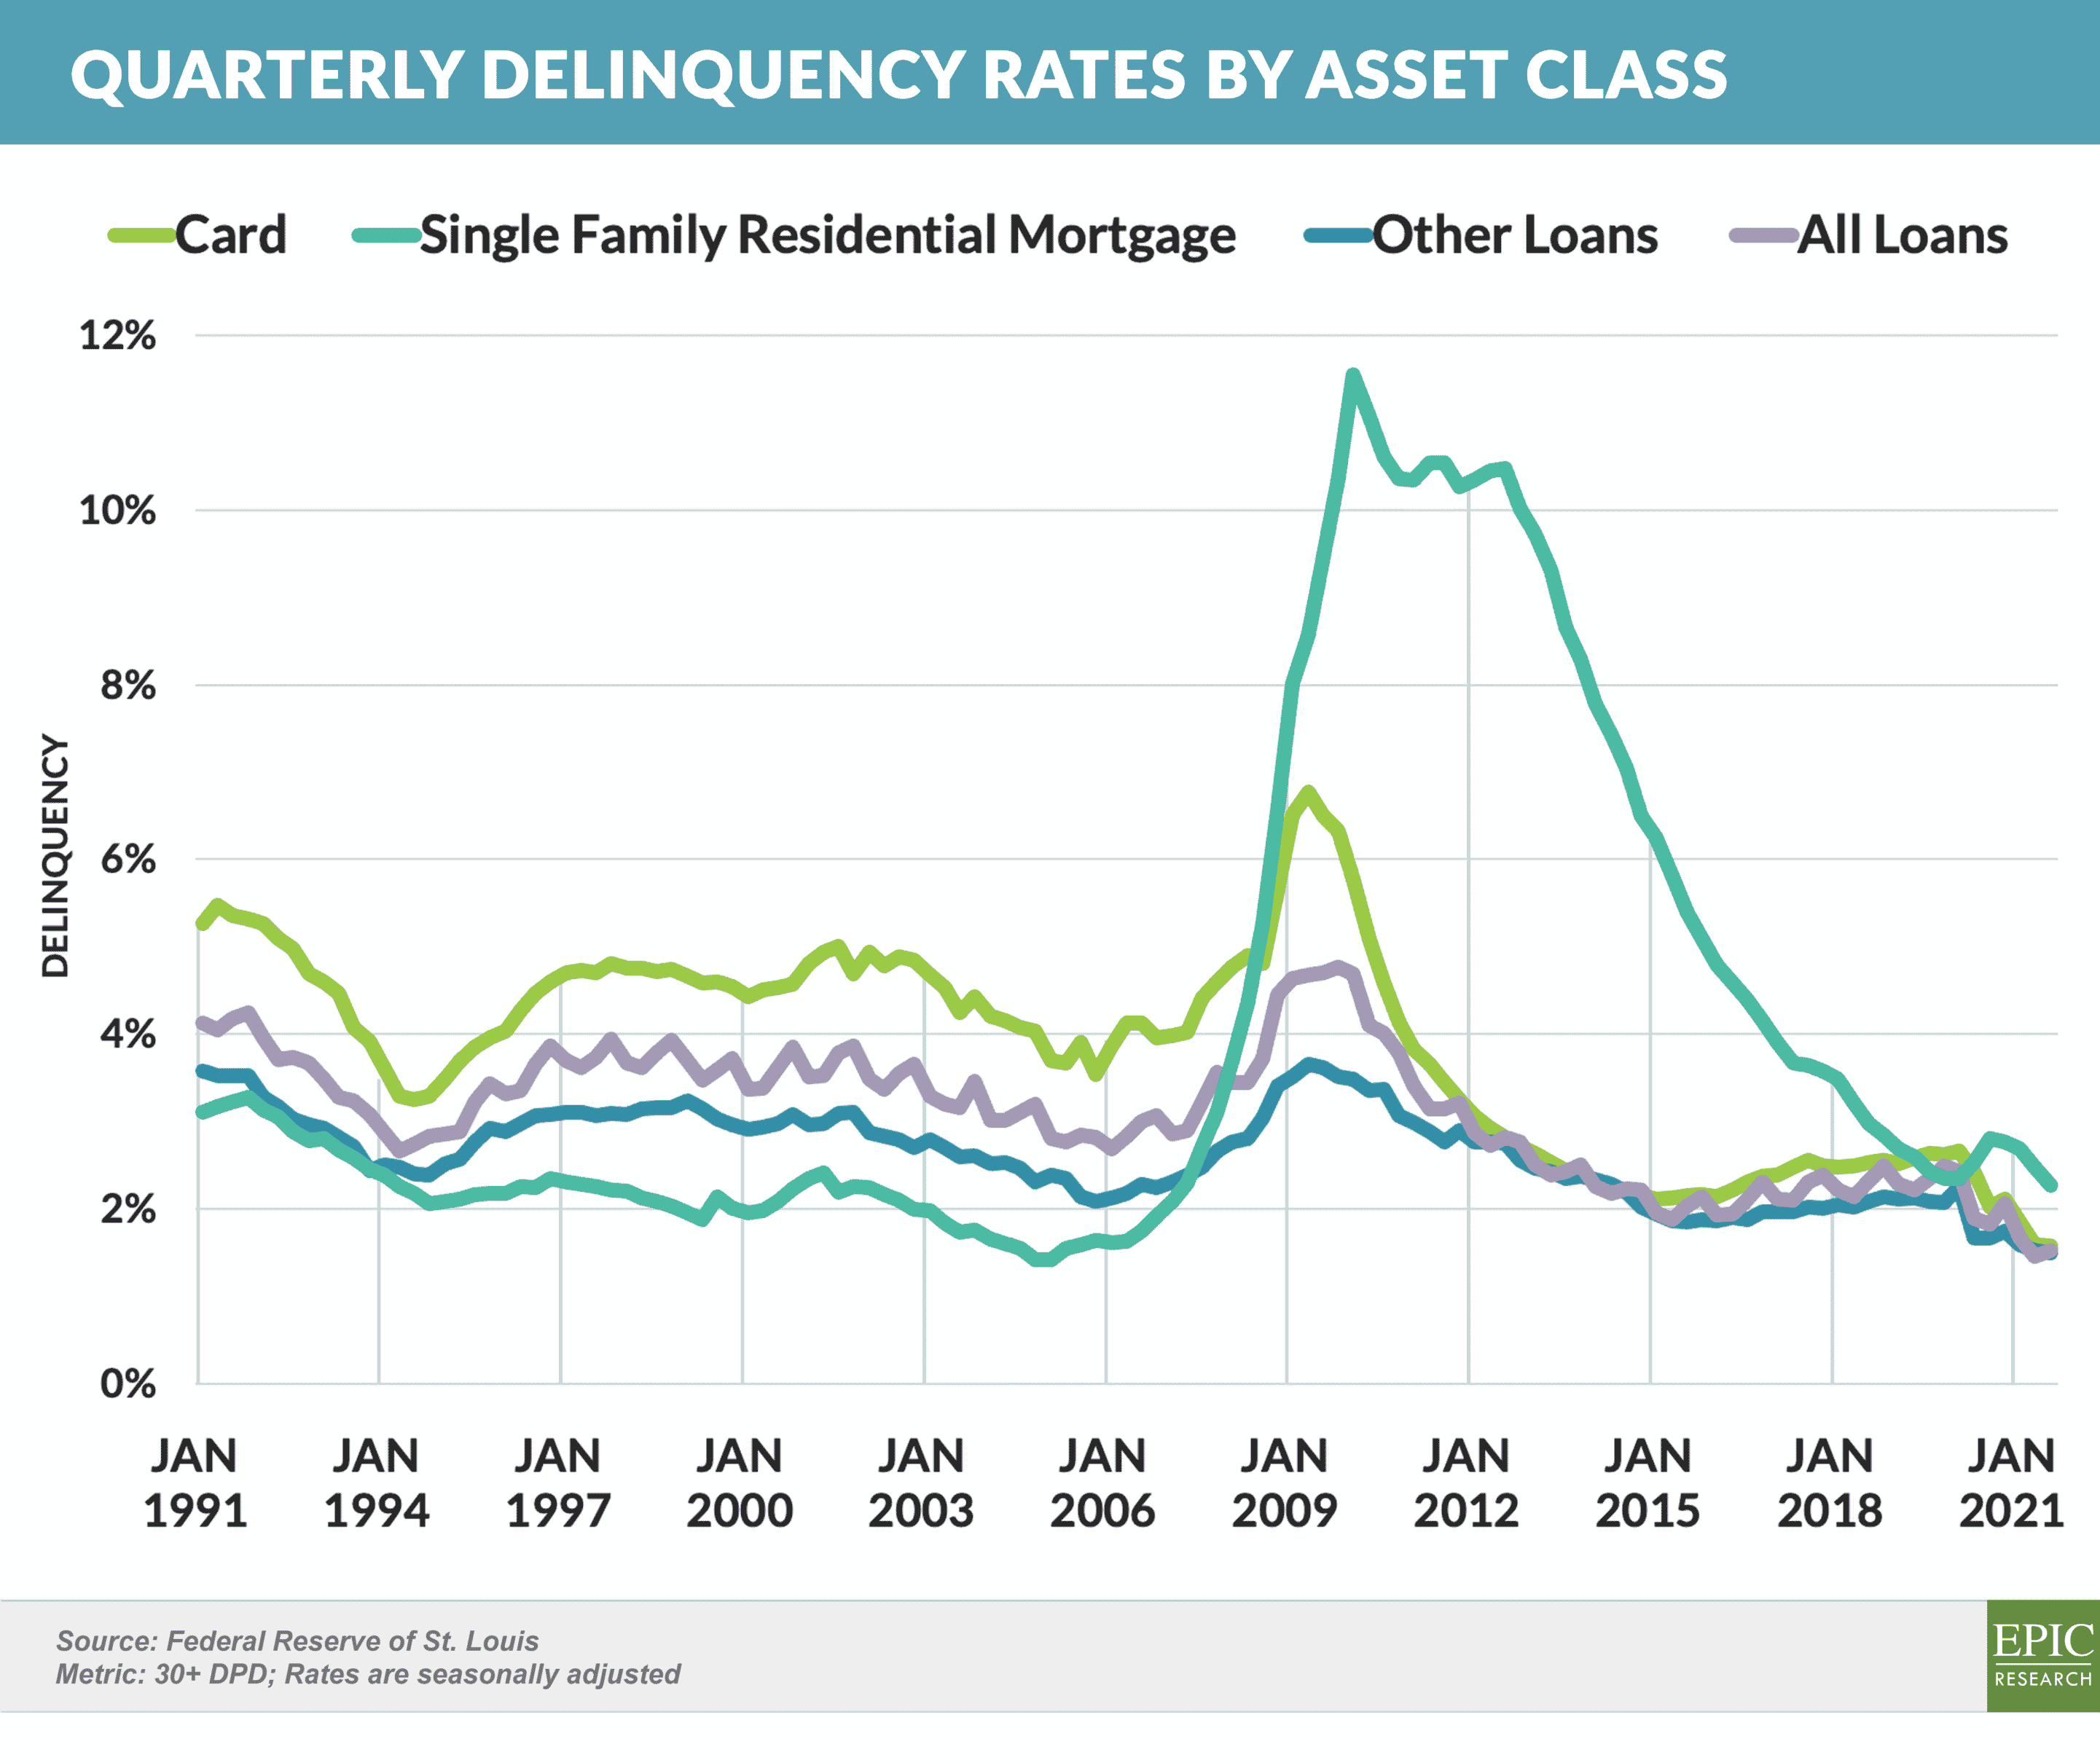 Quarterly Delinquency Rates by Asset Class